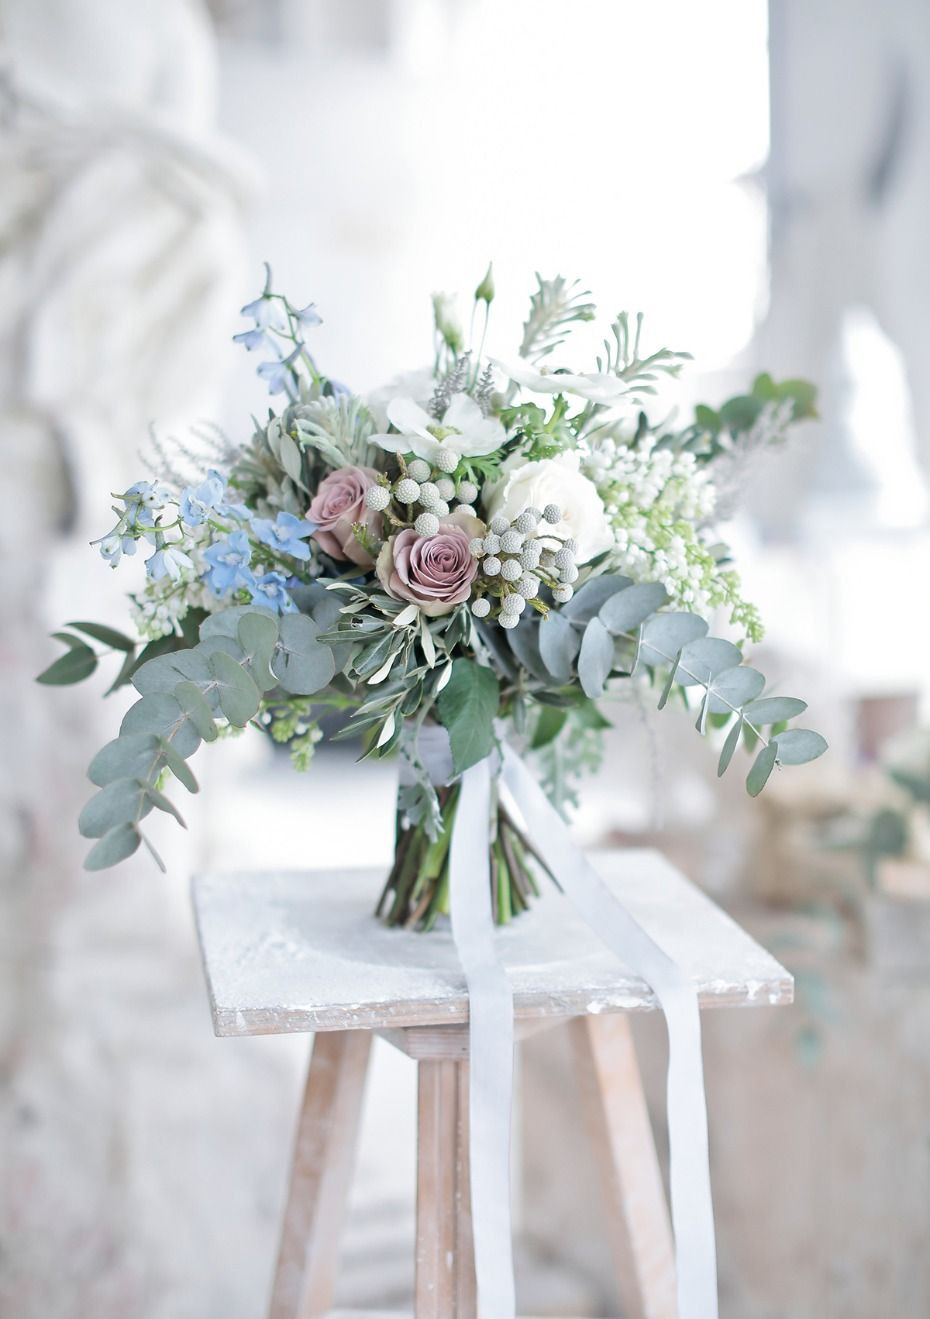 Wedding Flowers Bridal Bouquet
 How To Marble Your Wedding Day